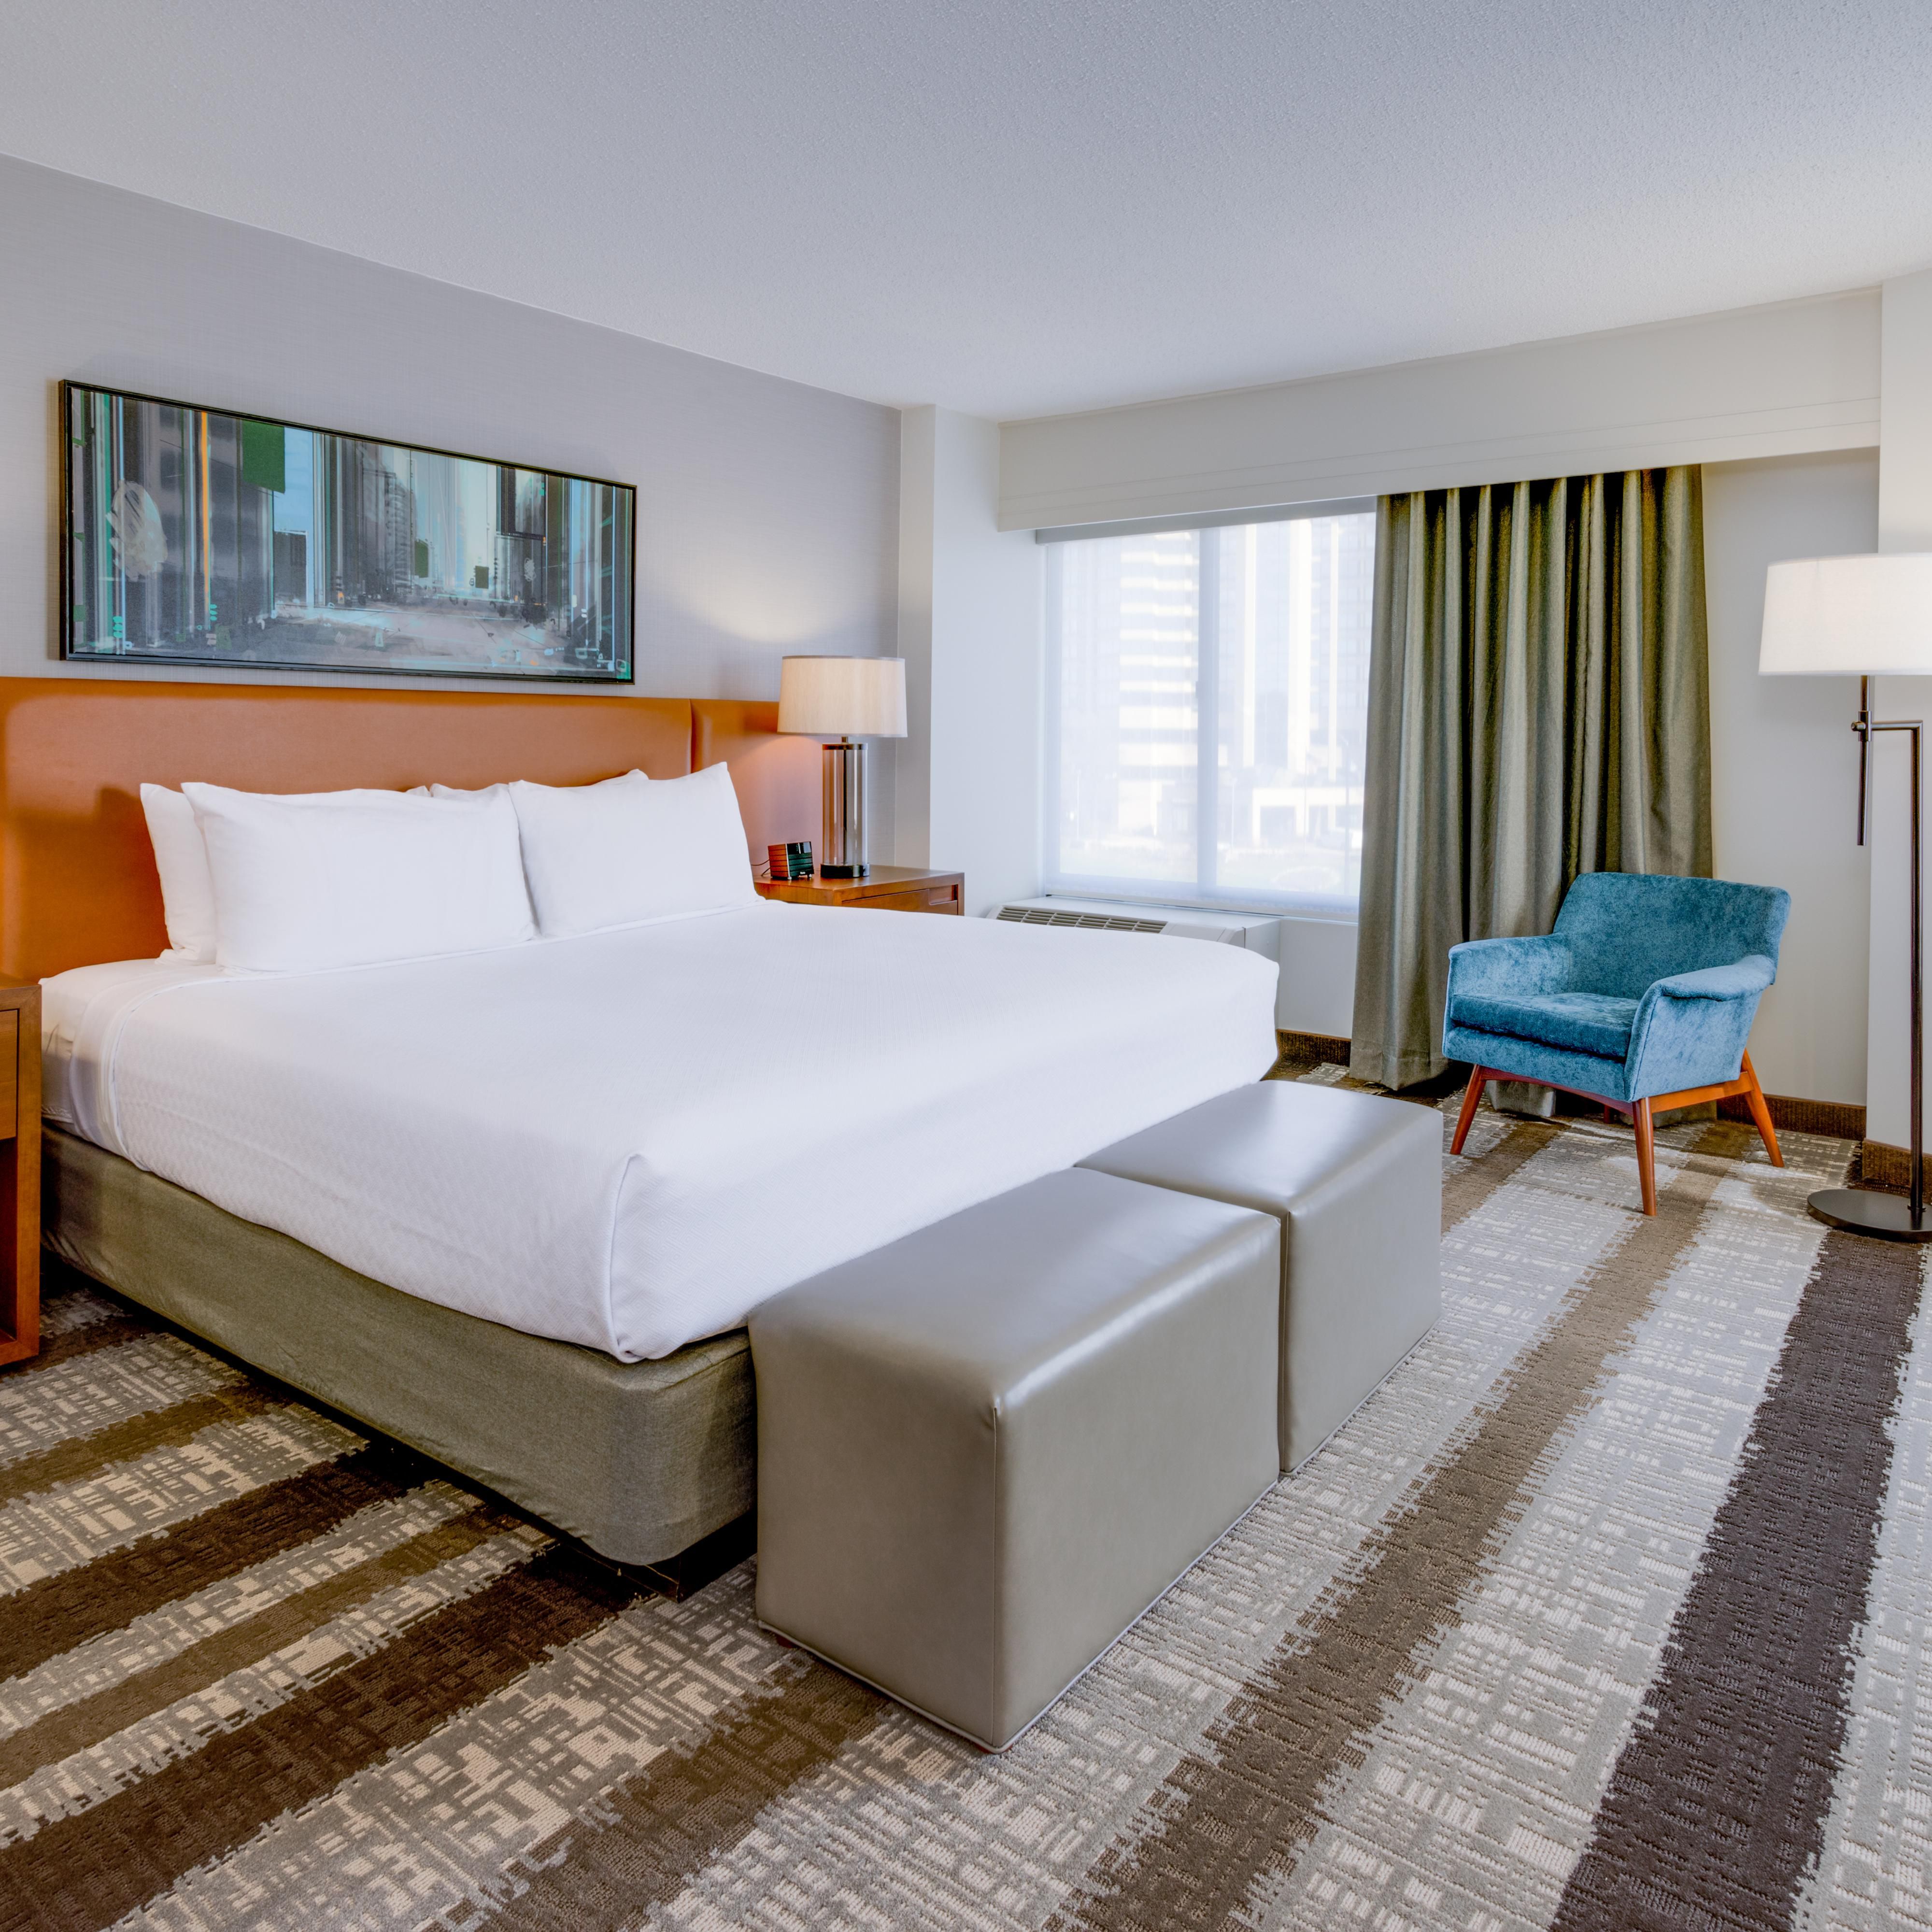 Newly Renovated Executive rooms give the extra space you need.